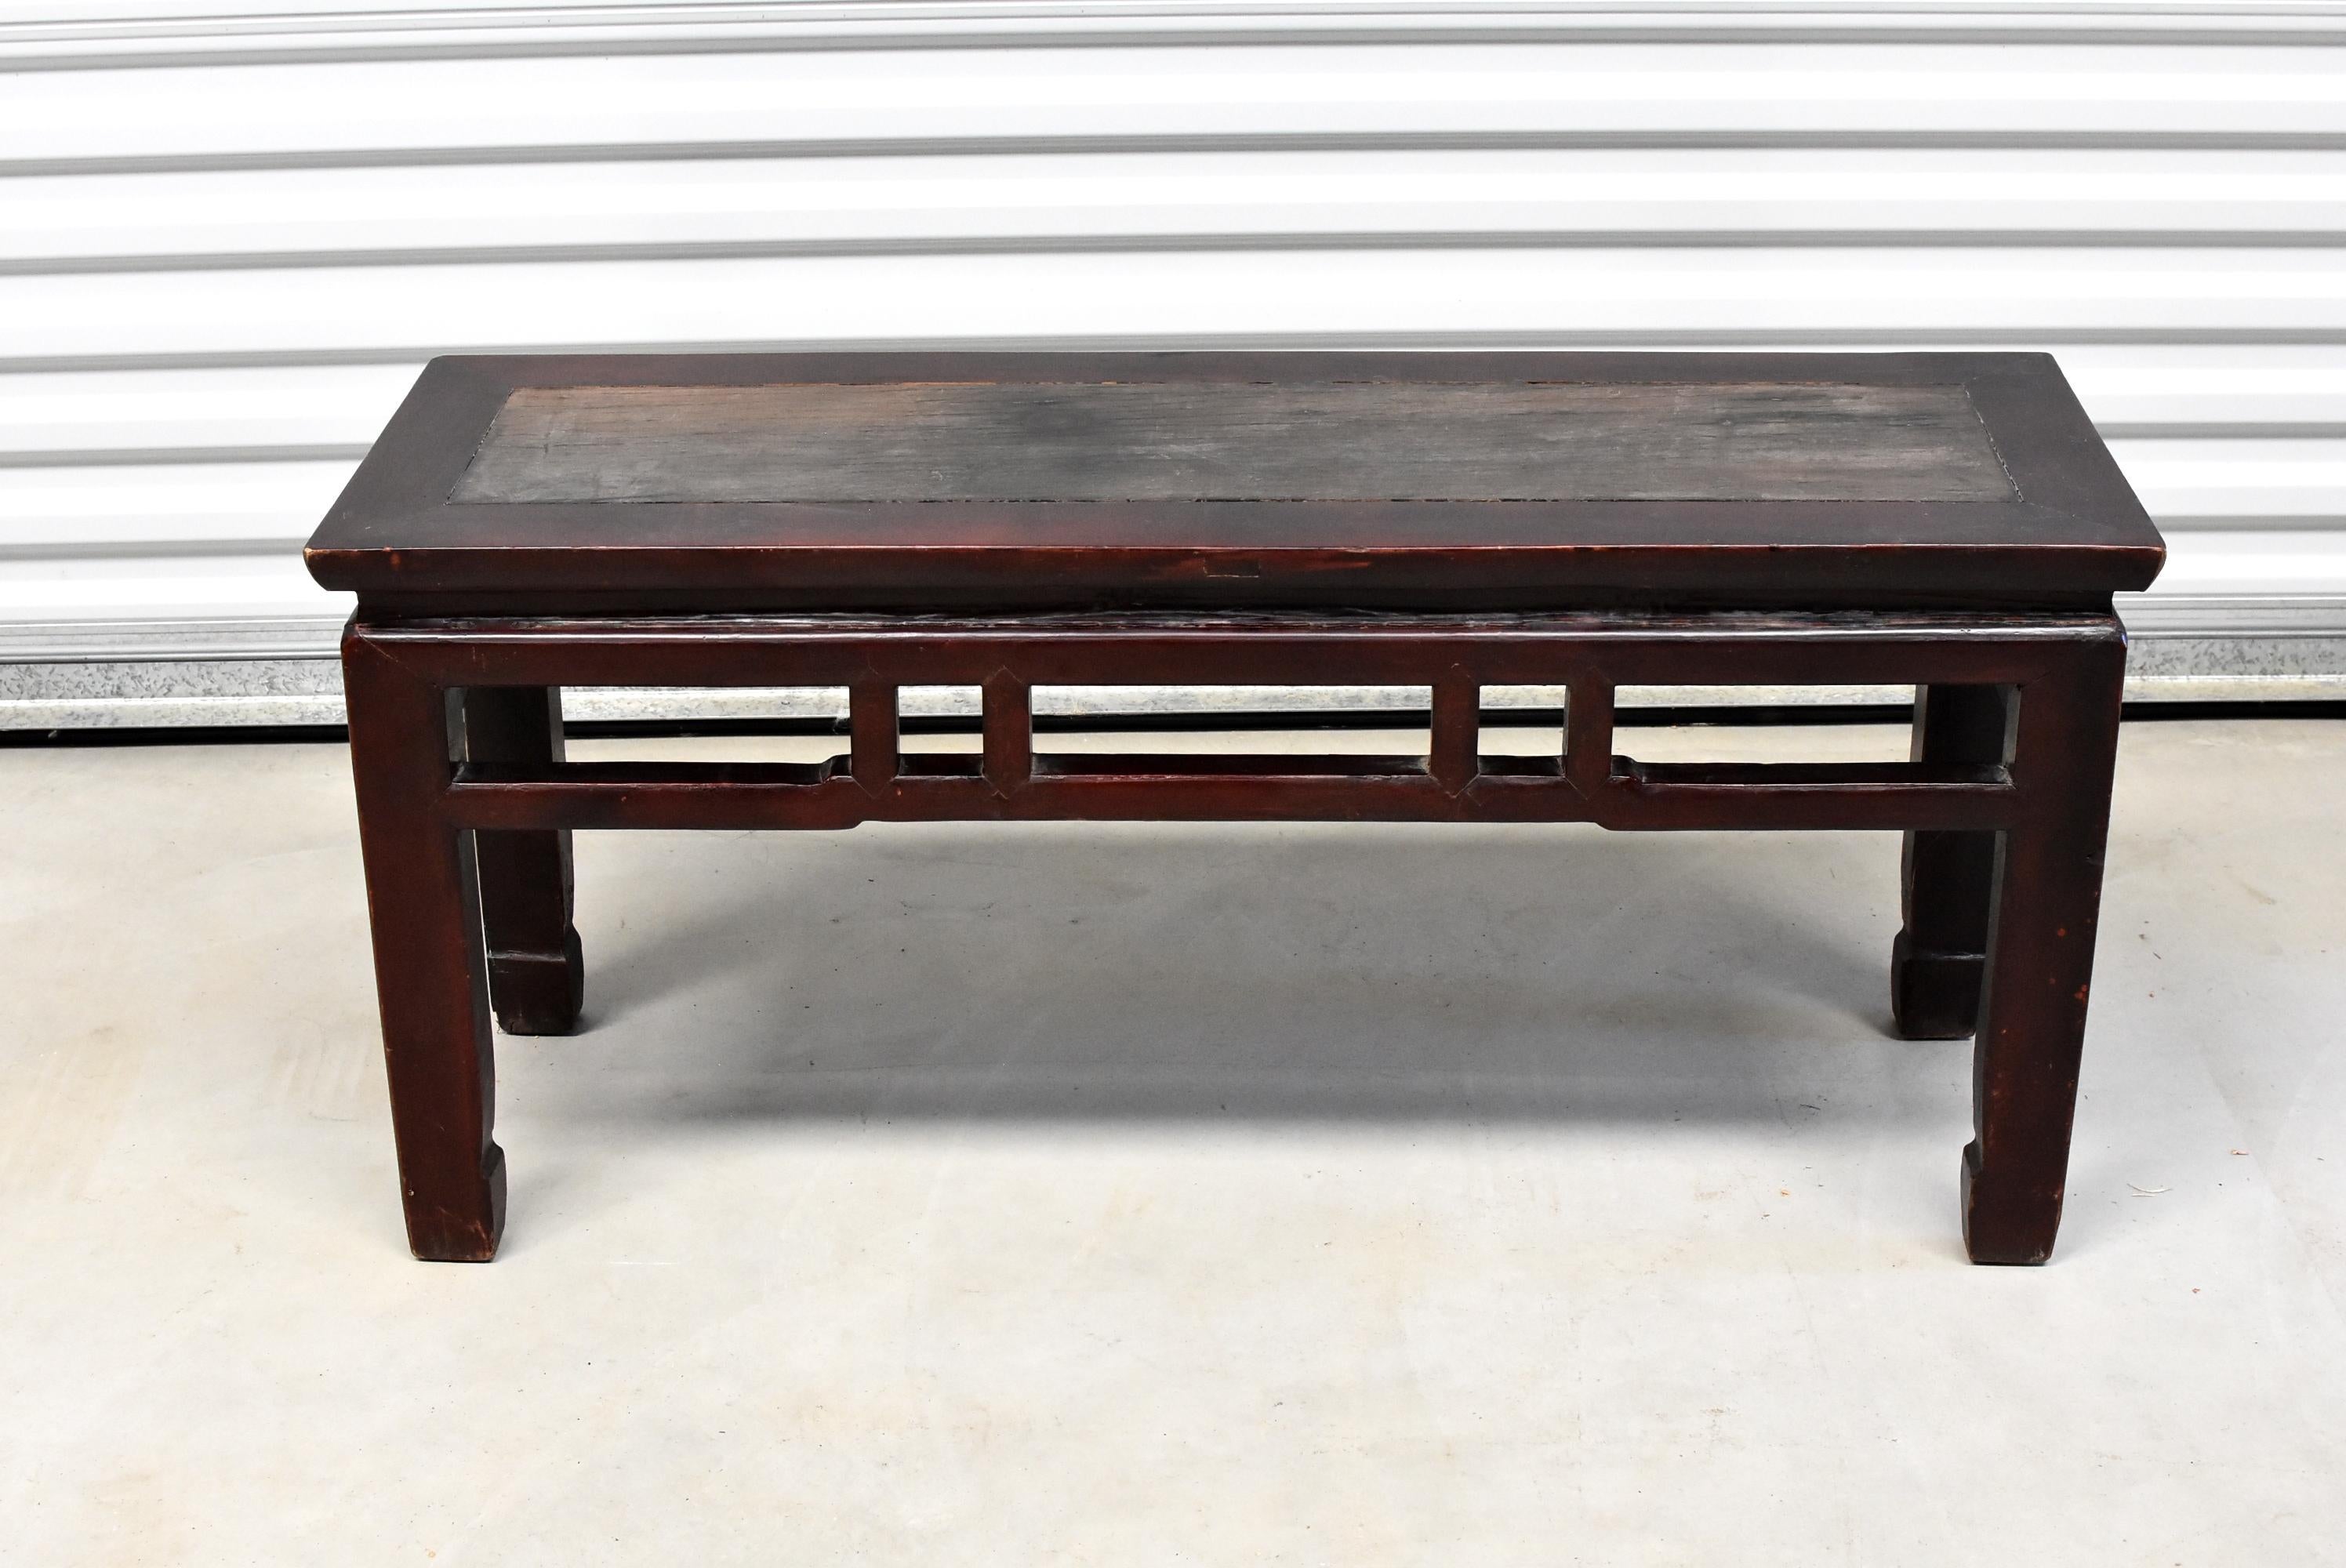 Superb value! A beautiful solid wood bench from the 19th century south of China's YangZi River. Solid single board inset in 